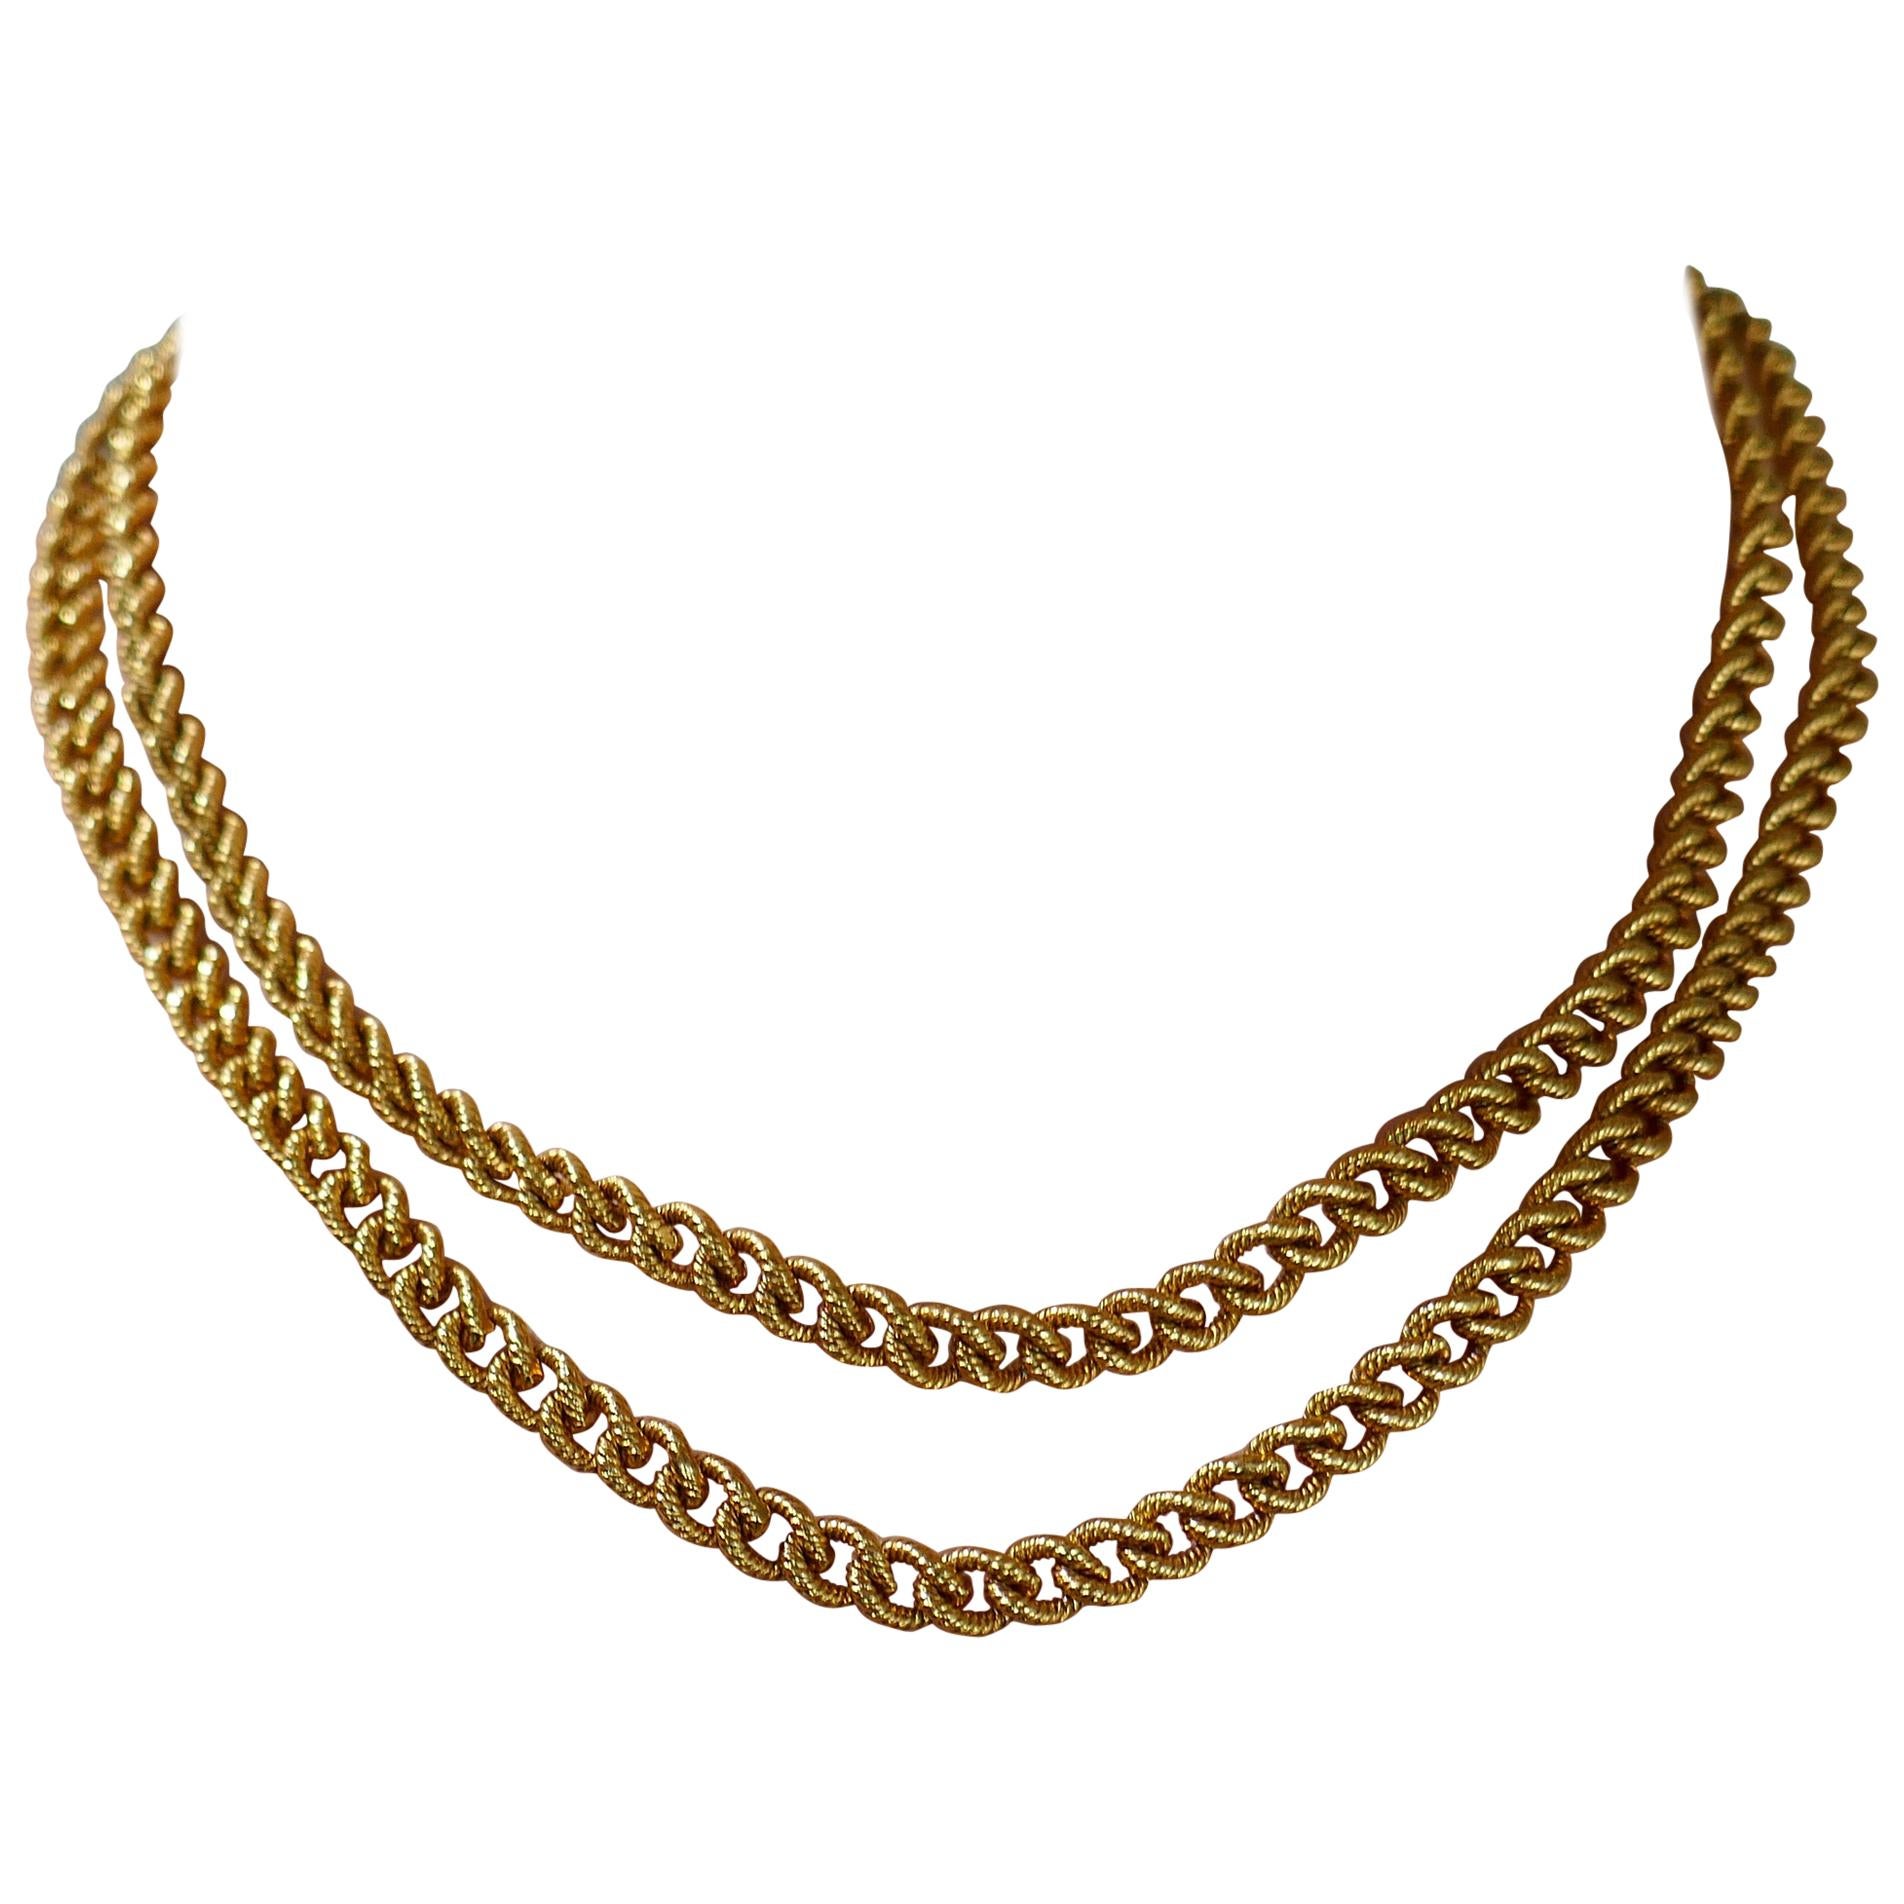 Timeless and elegant chain necklace created by Chaumet in France in the 1970s. Chic, textured and wearable, the necklace is a great addition to your jewelry collection.
The necklace is made of 18 karat yellow gold. 
It measures 32 x 3/16 inches (81